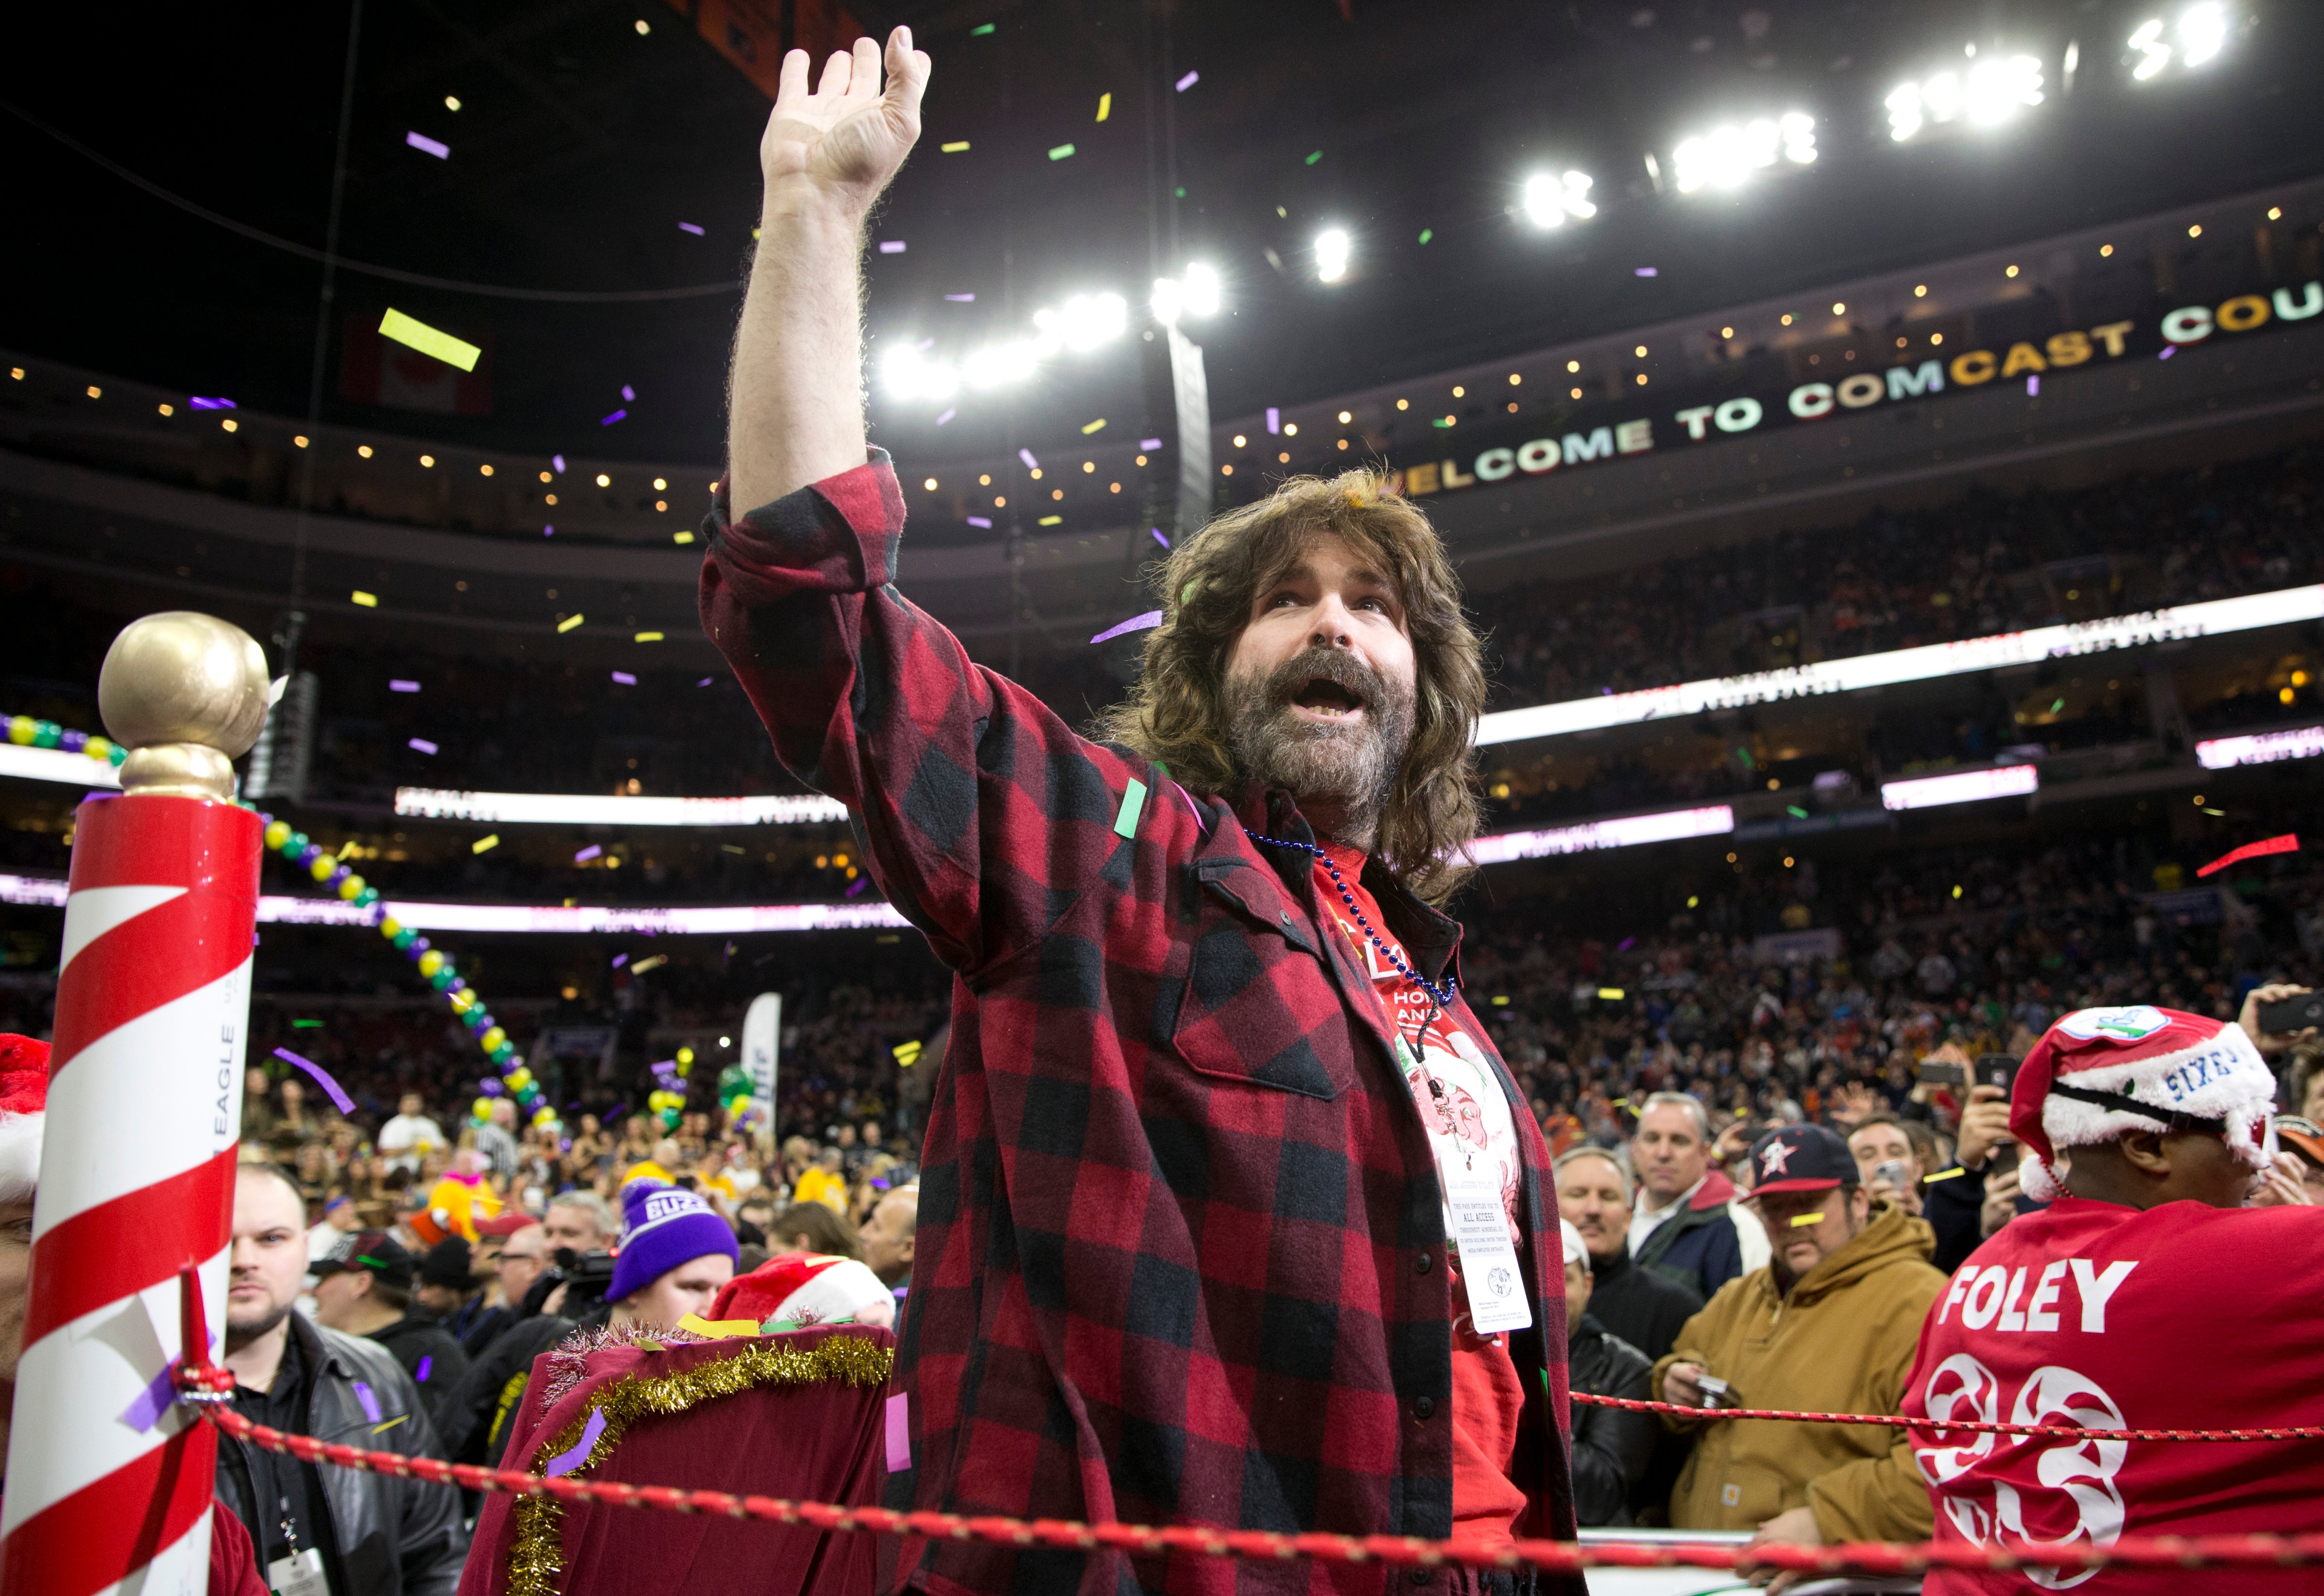 Professional wrestler Mick Foley participates in Wing Bowl 23 on January 30, 2015 at the Wells Fargo Center in Philadelphia, Pennsylvania. (Mitchell Leff&mdash;Getty Images)